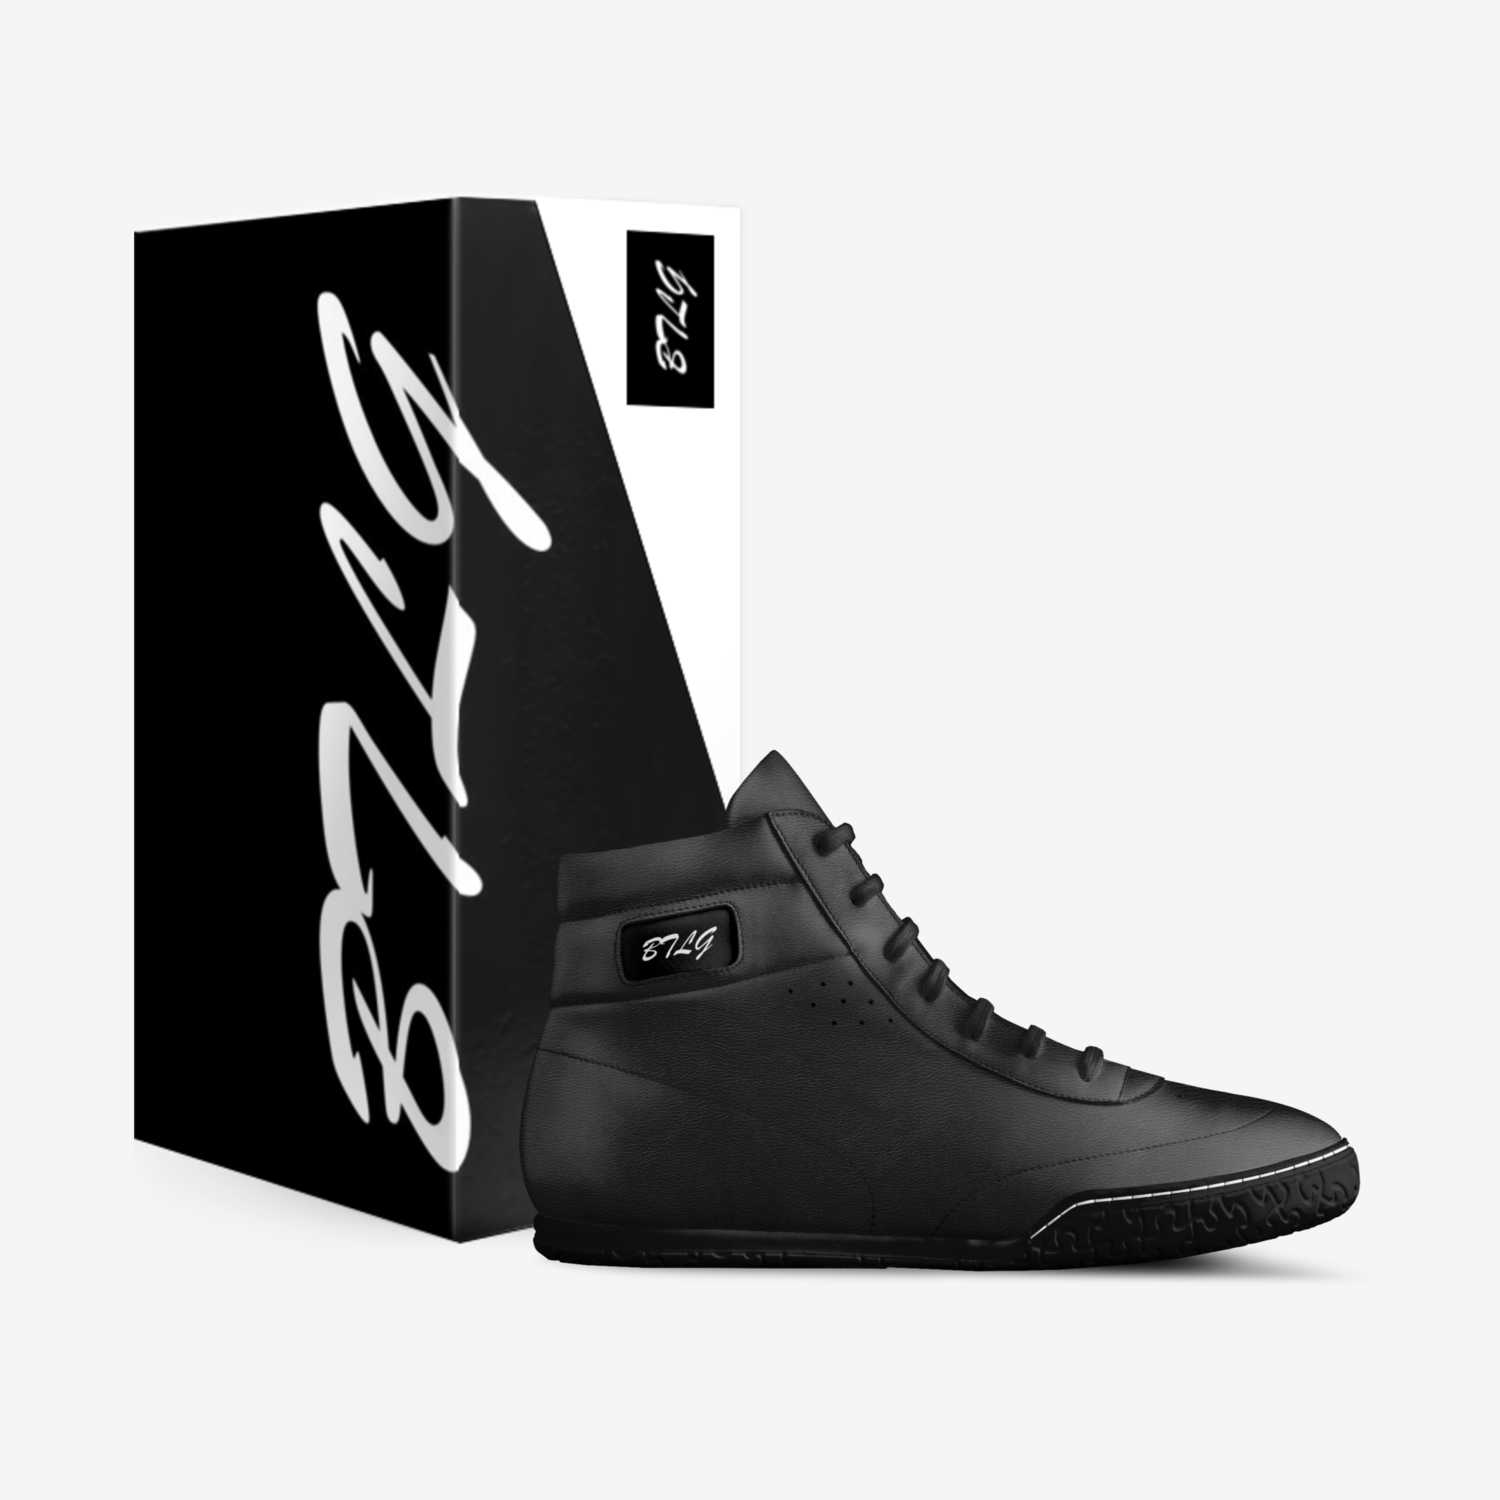 BTLG custom made in Italy shoes by Rob Lafata | Box view